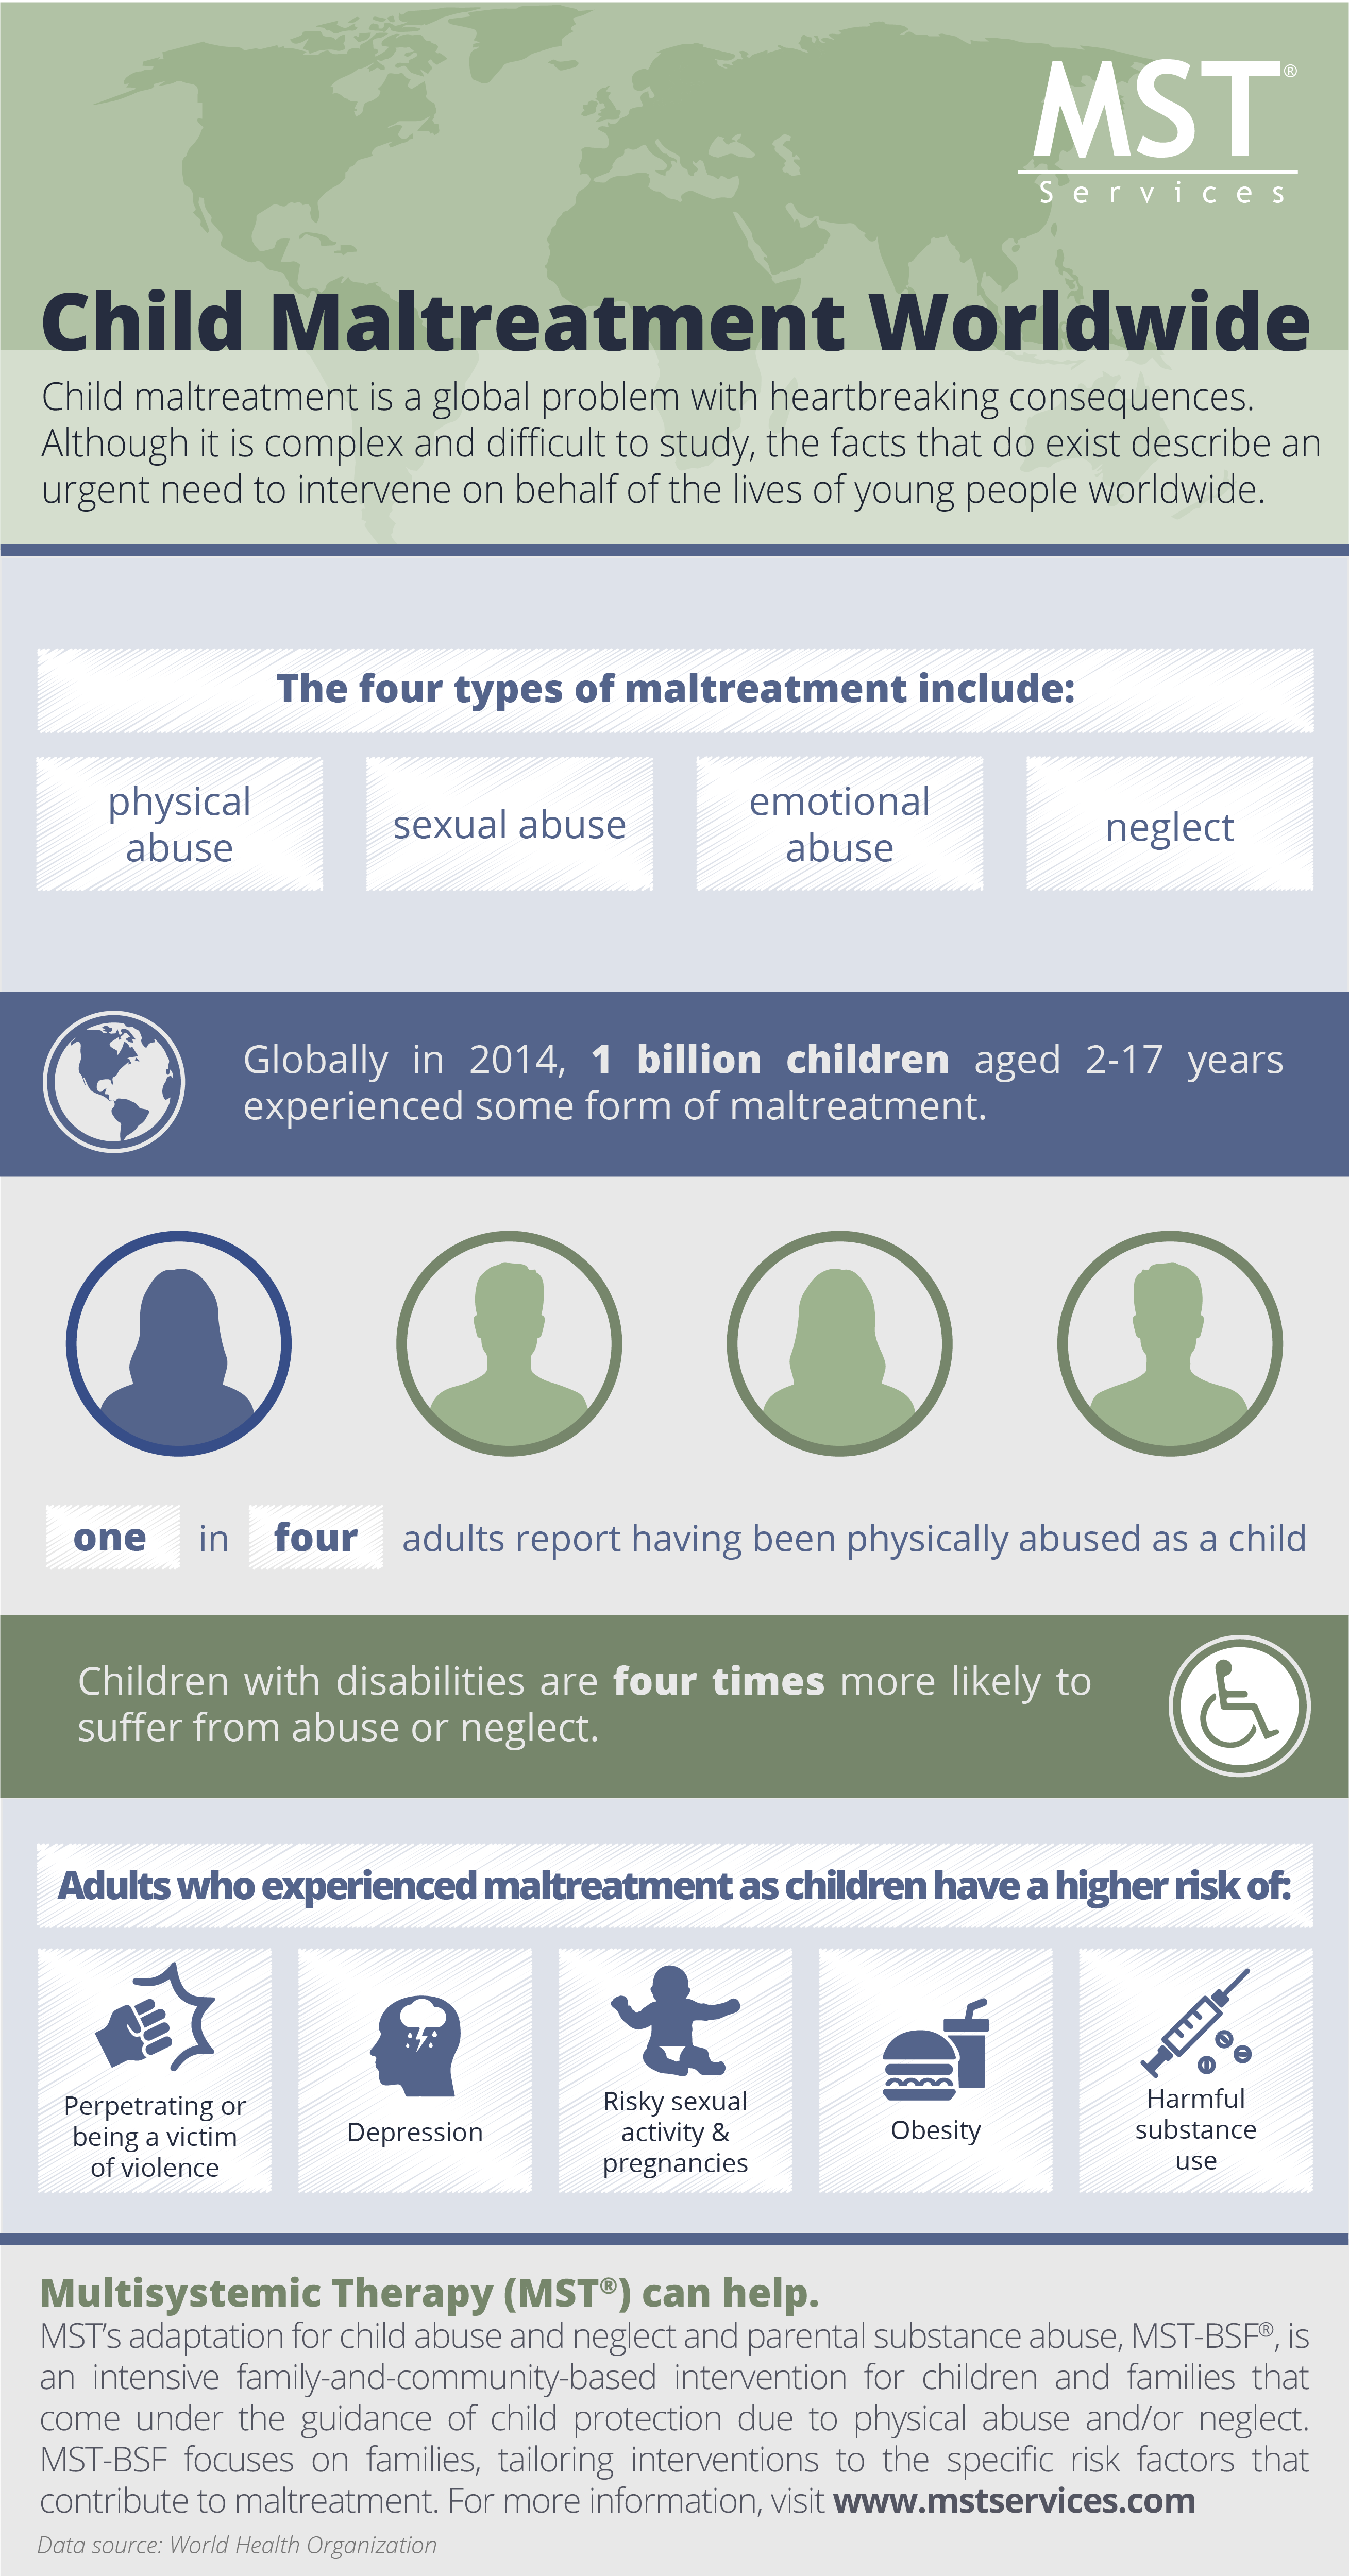 research on child maltreatment and violence in youth